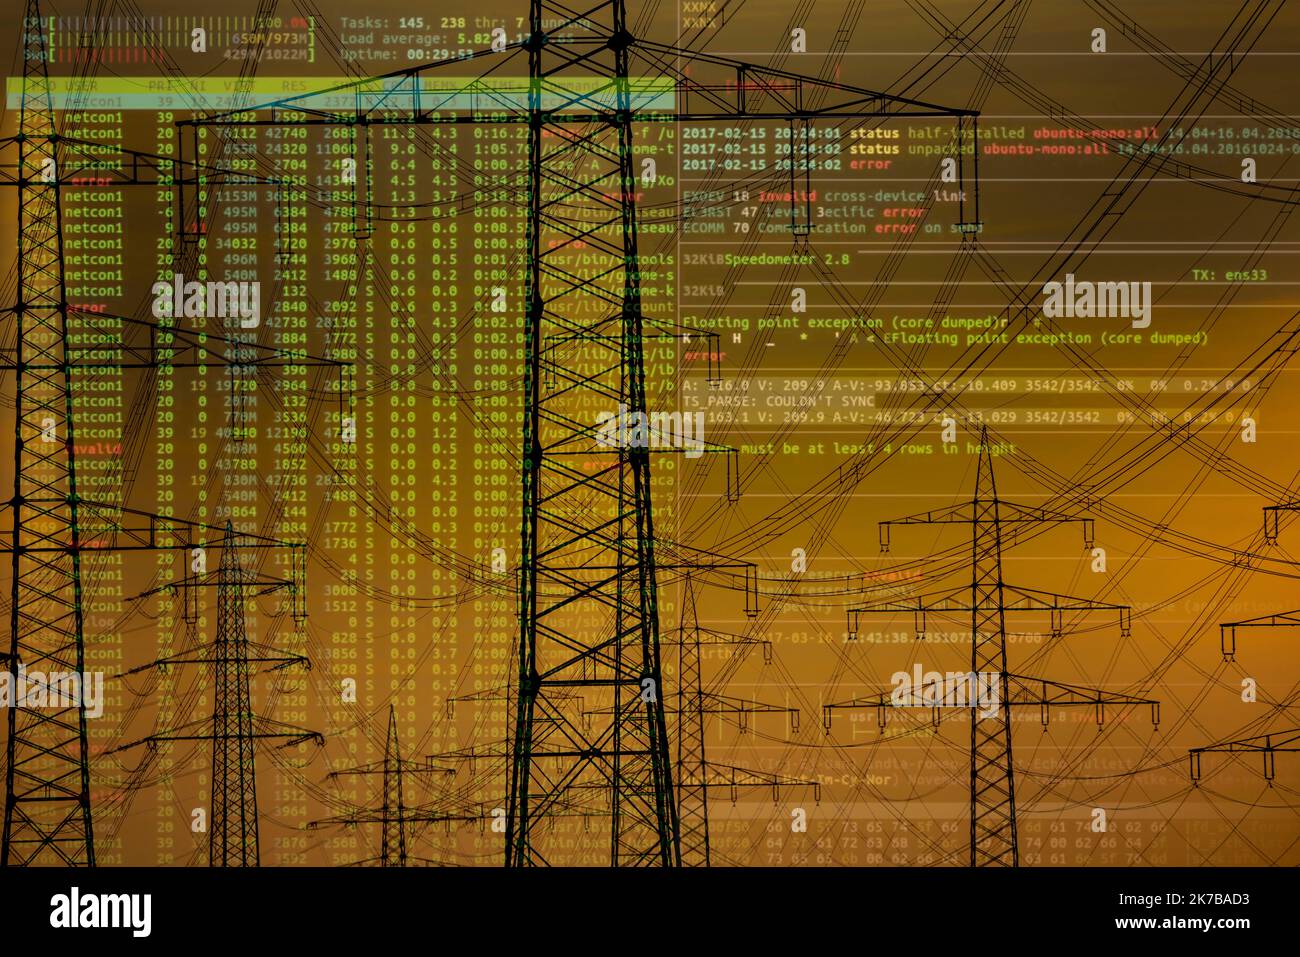 Symbolic image Critical infrastructure, blackout danger, cyberterrorism, extra-high voltage lines, 380 KV, power line, the power comes from the Rhenis Stock Photo